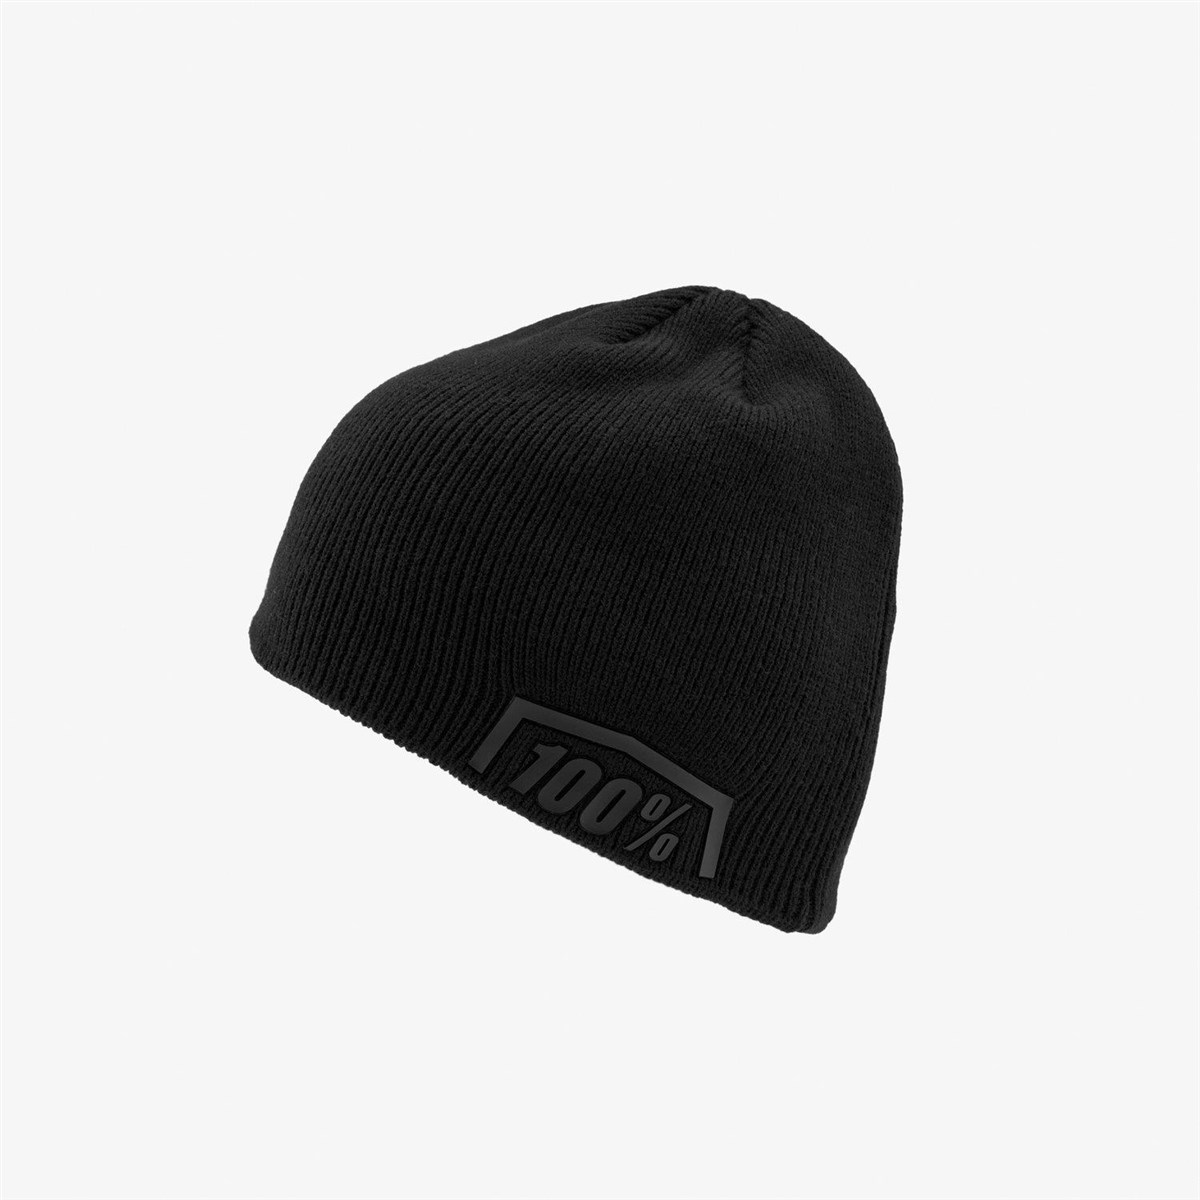 100% Essential Beanie product image